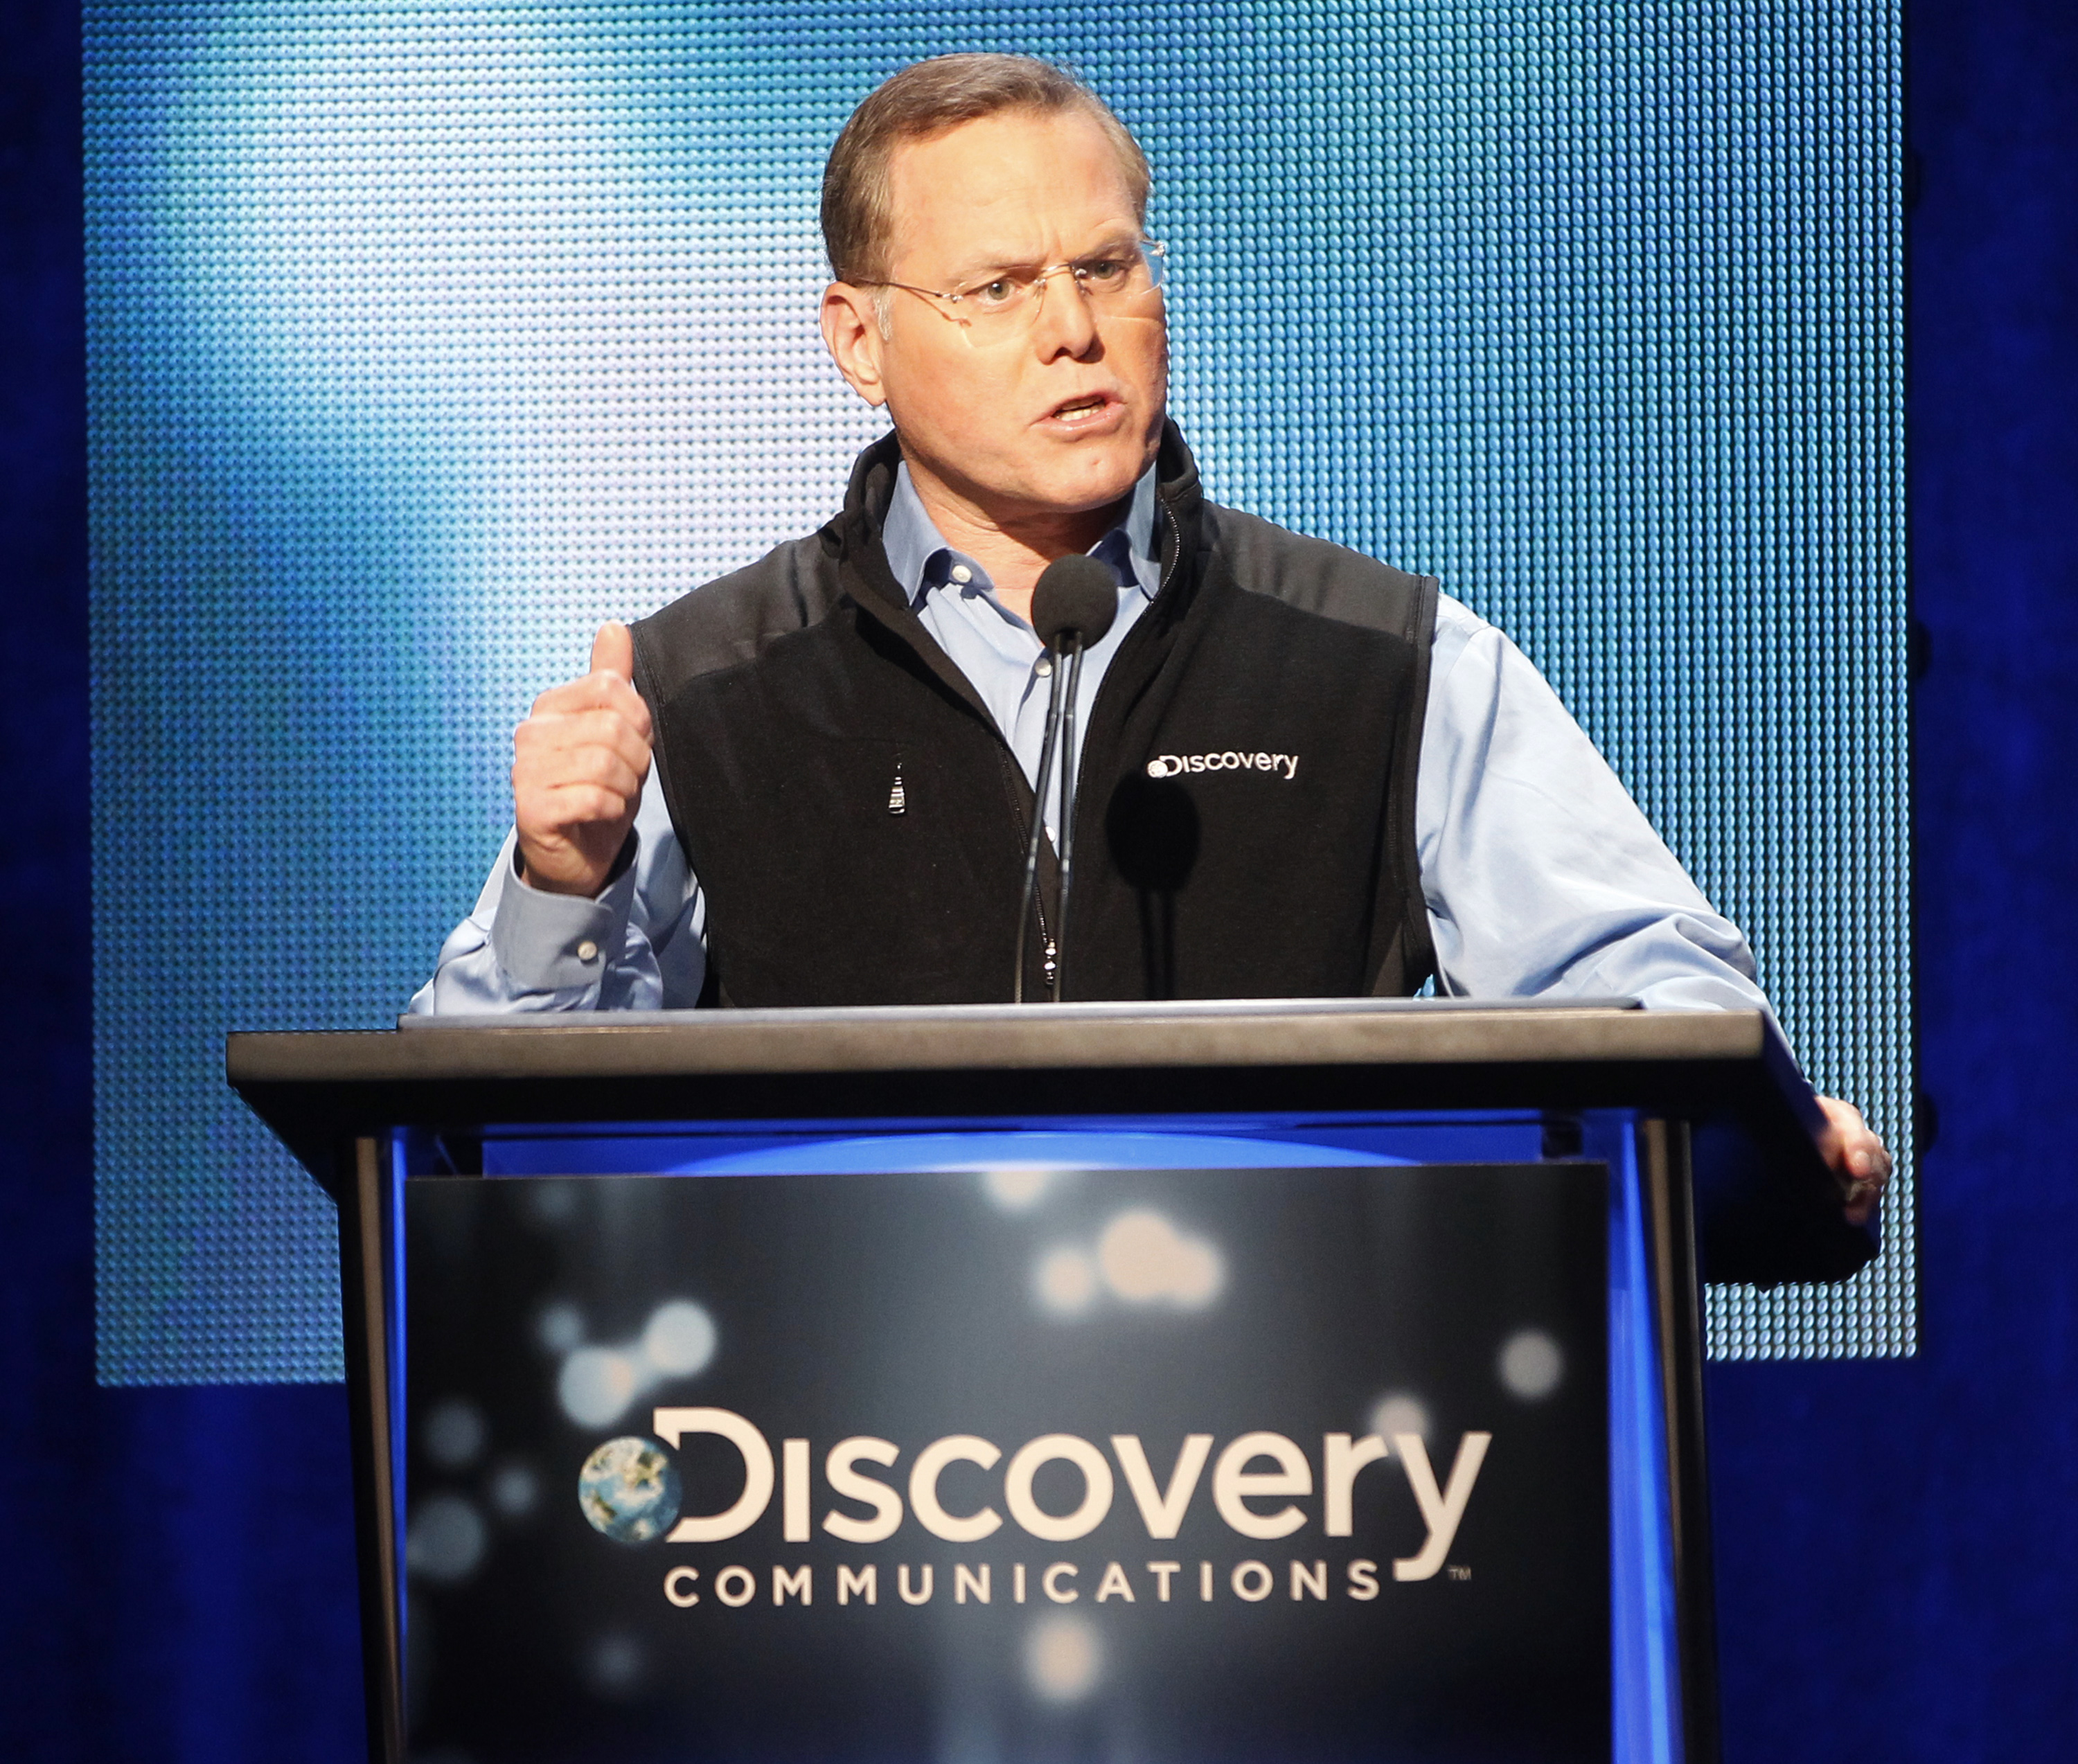 1.	Discovery Communications